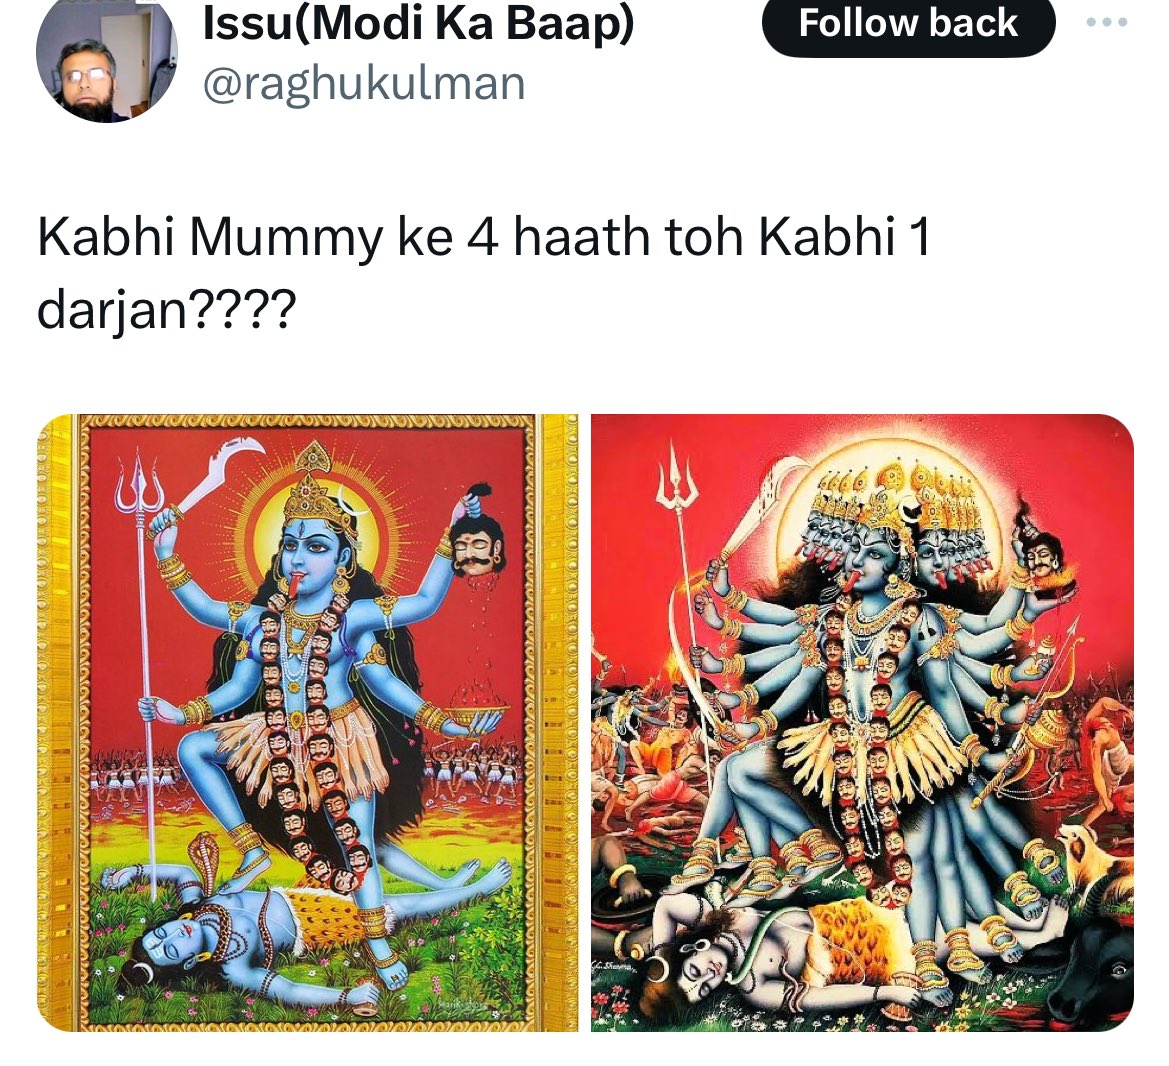 Hello @Uppolice @assampolice @GoI_MeitY this handle is not just abusing Hindu gods, but now challenging police too (read his msg for you). Such hateful posts get escalated & in no time translates into violence.